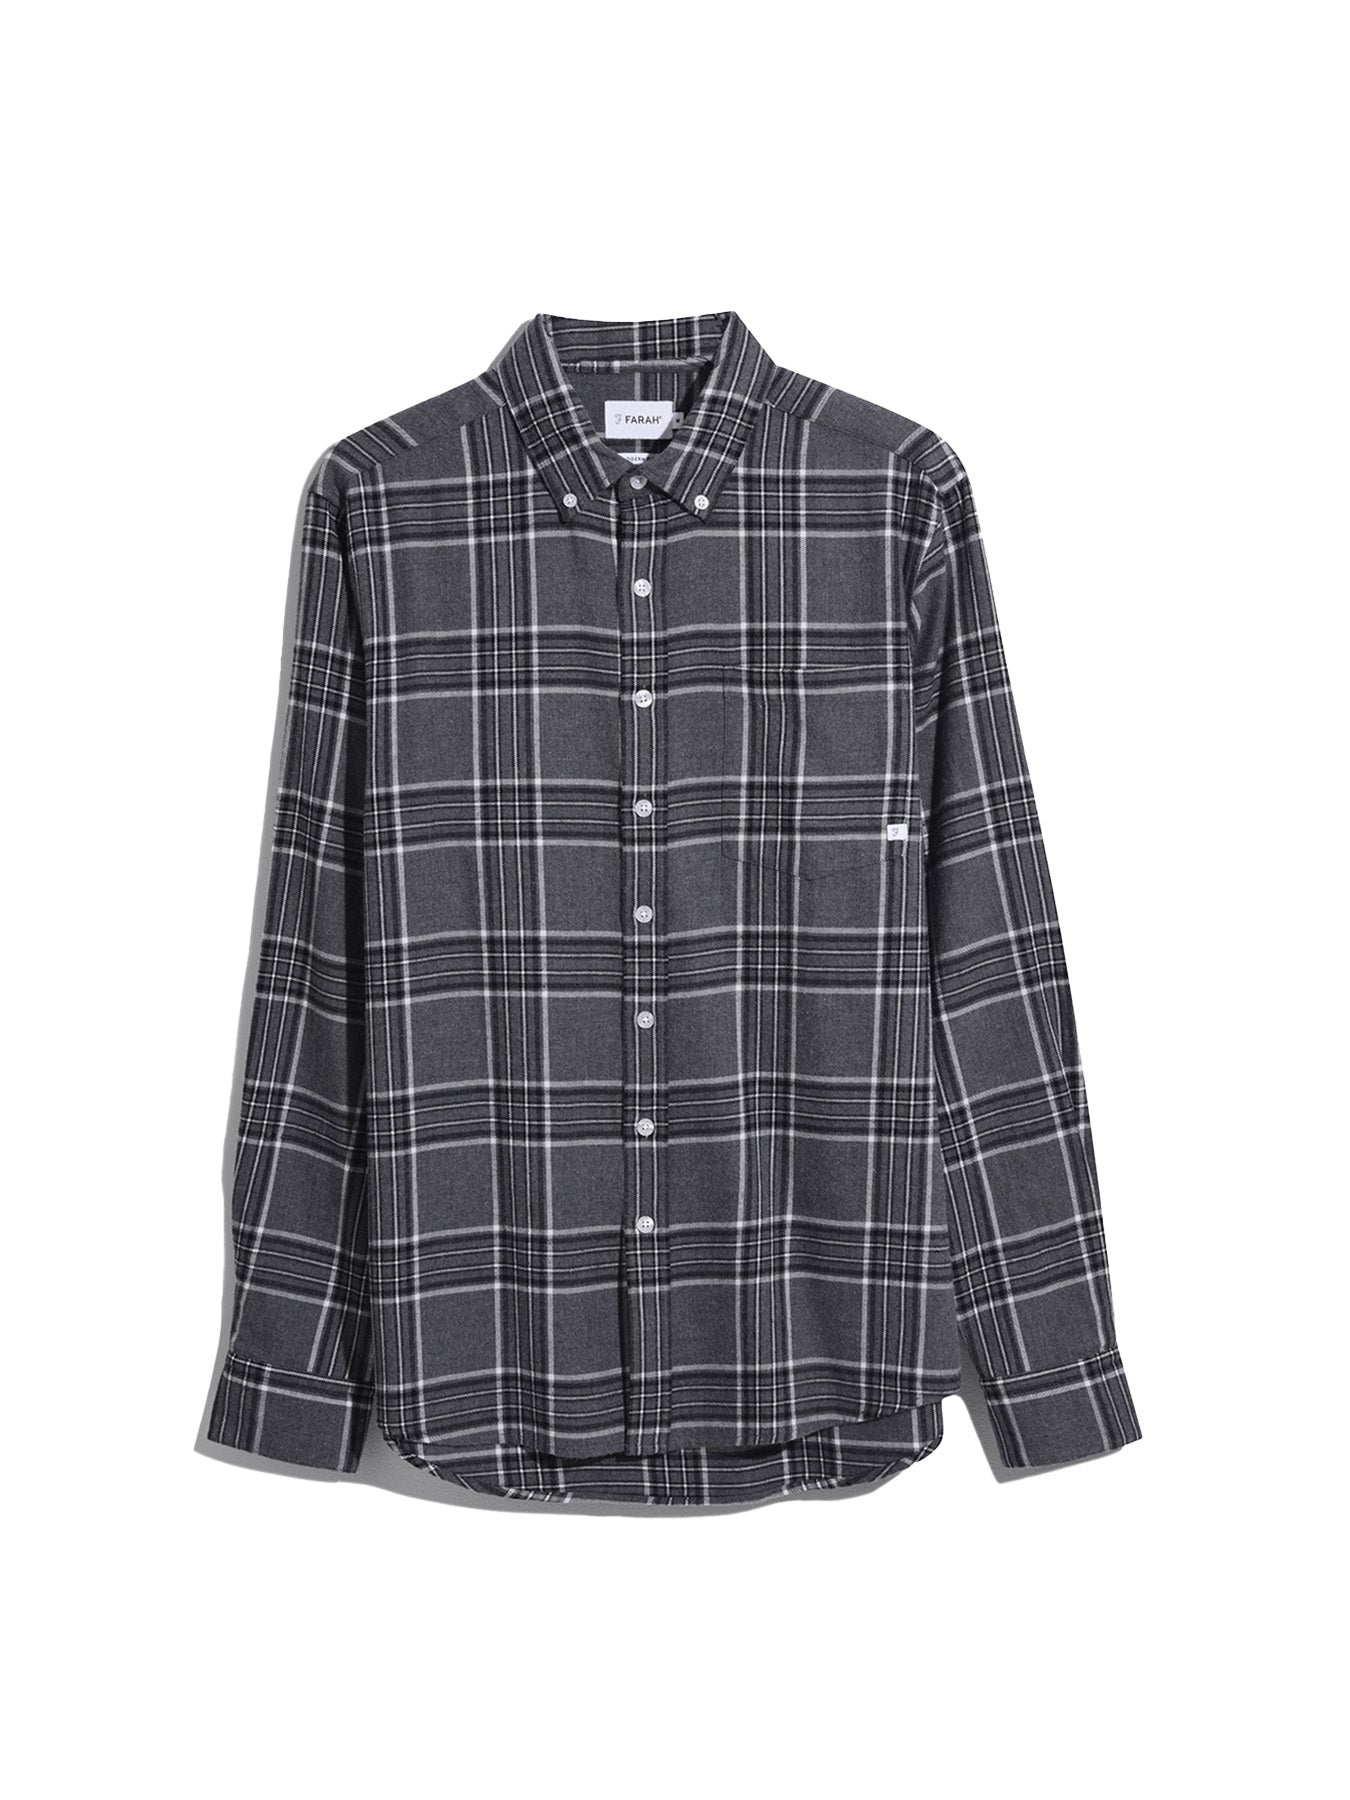 View Boyle Check Long Sleeve Shirt In Charcoal Marl information